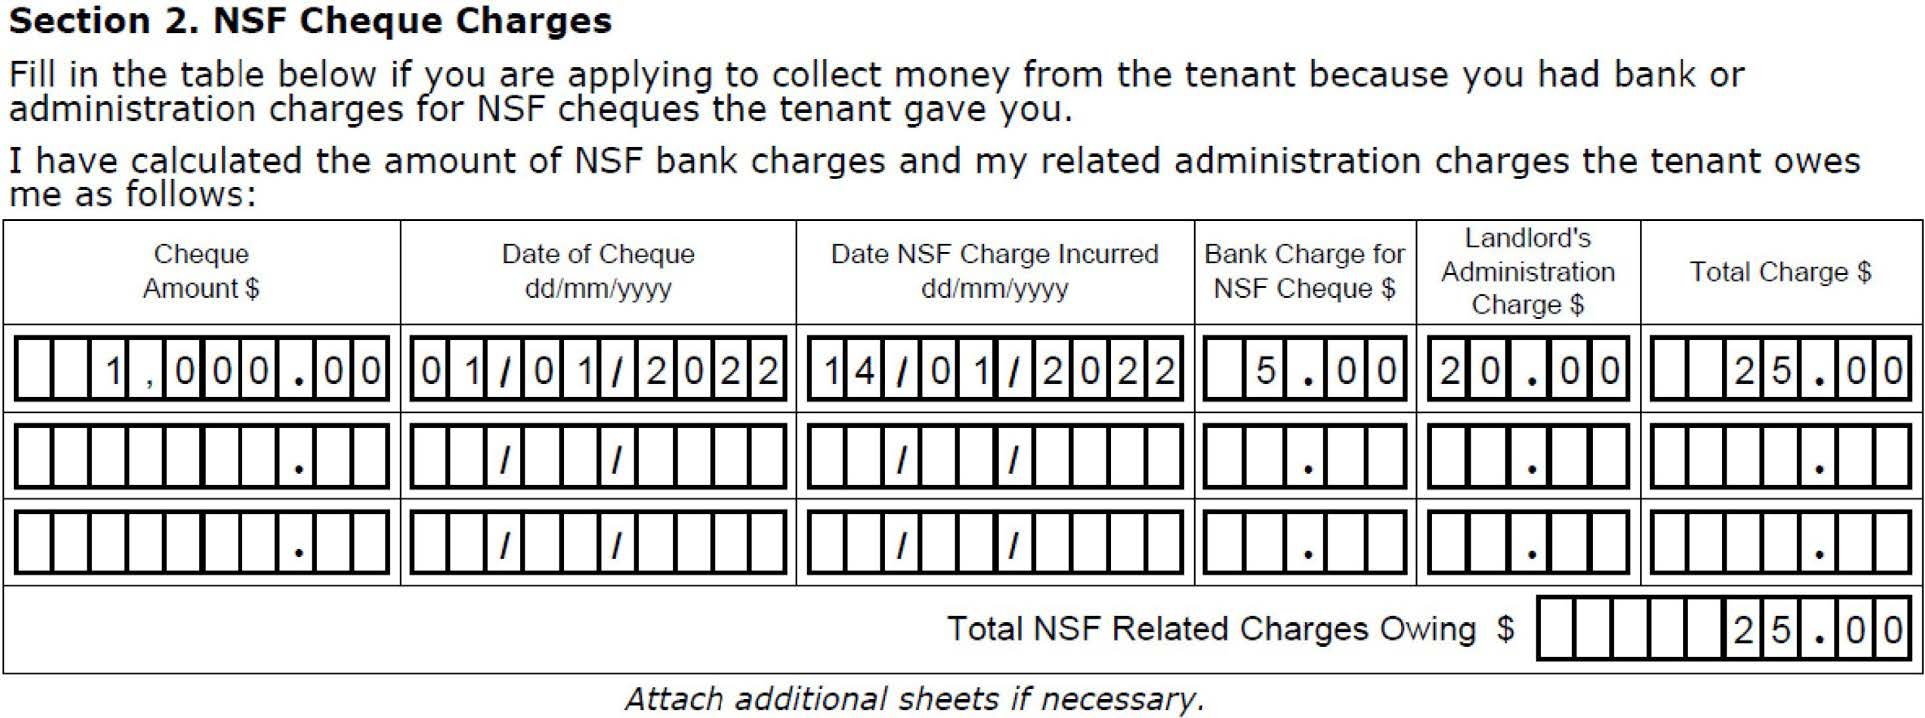 Part 4 NSF cheque charges visual example showing fields on the form being completed as described in this example.